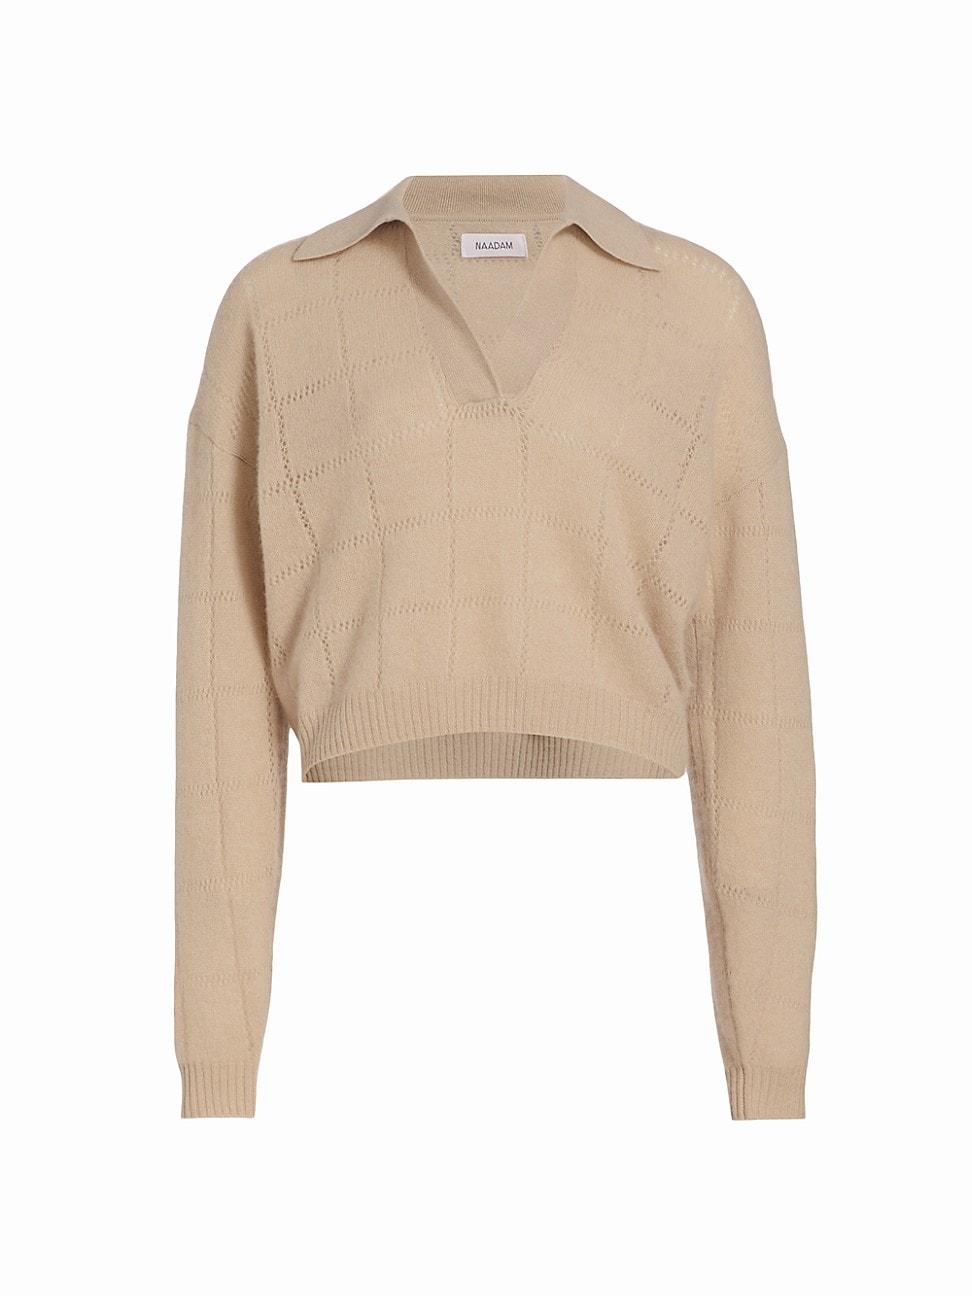 NAADAM Cashmere Grid Pointelle Polo in Natural | Lyst